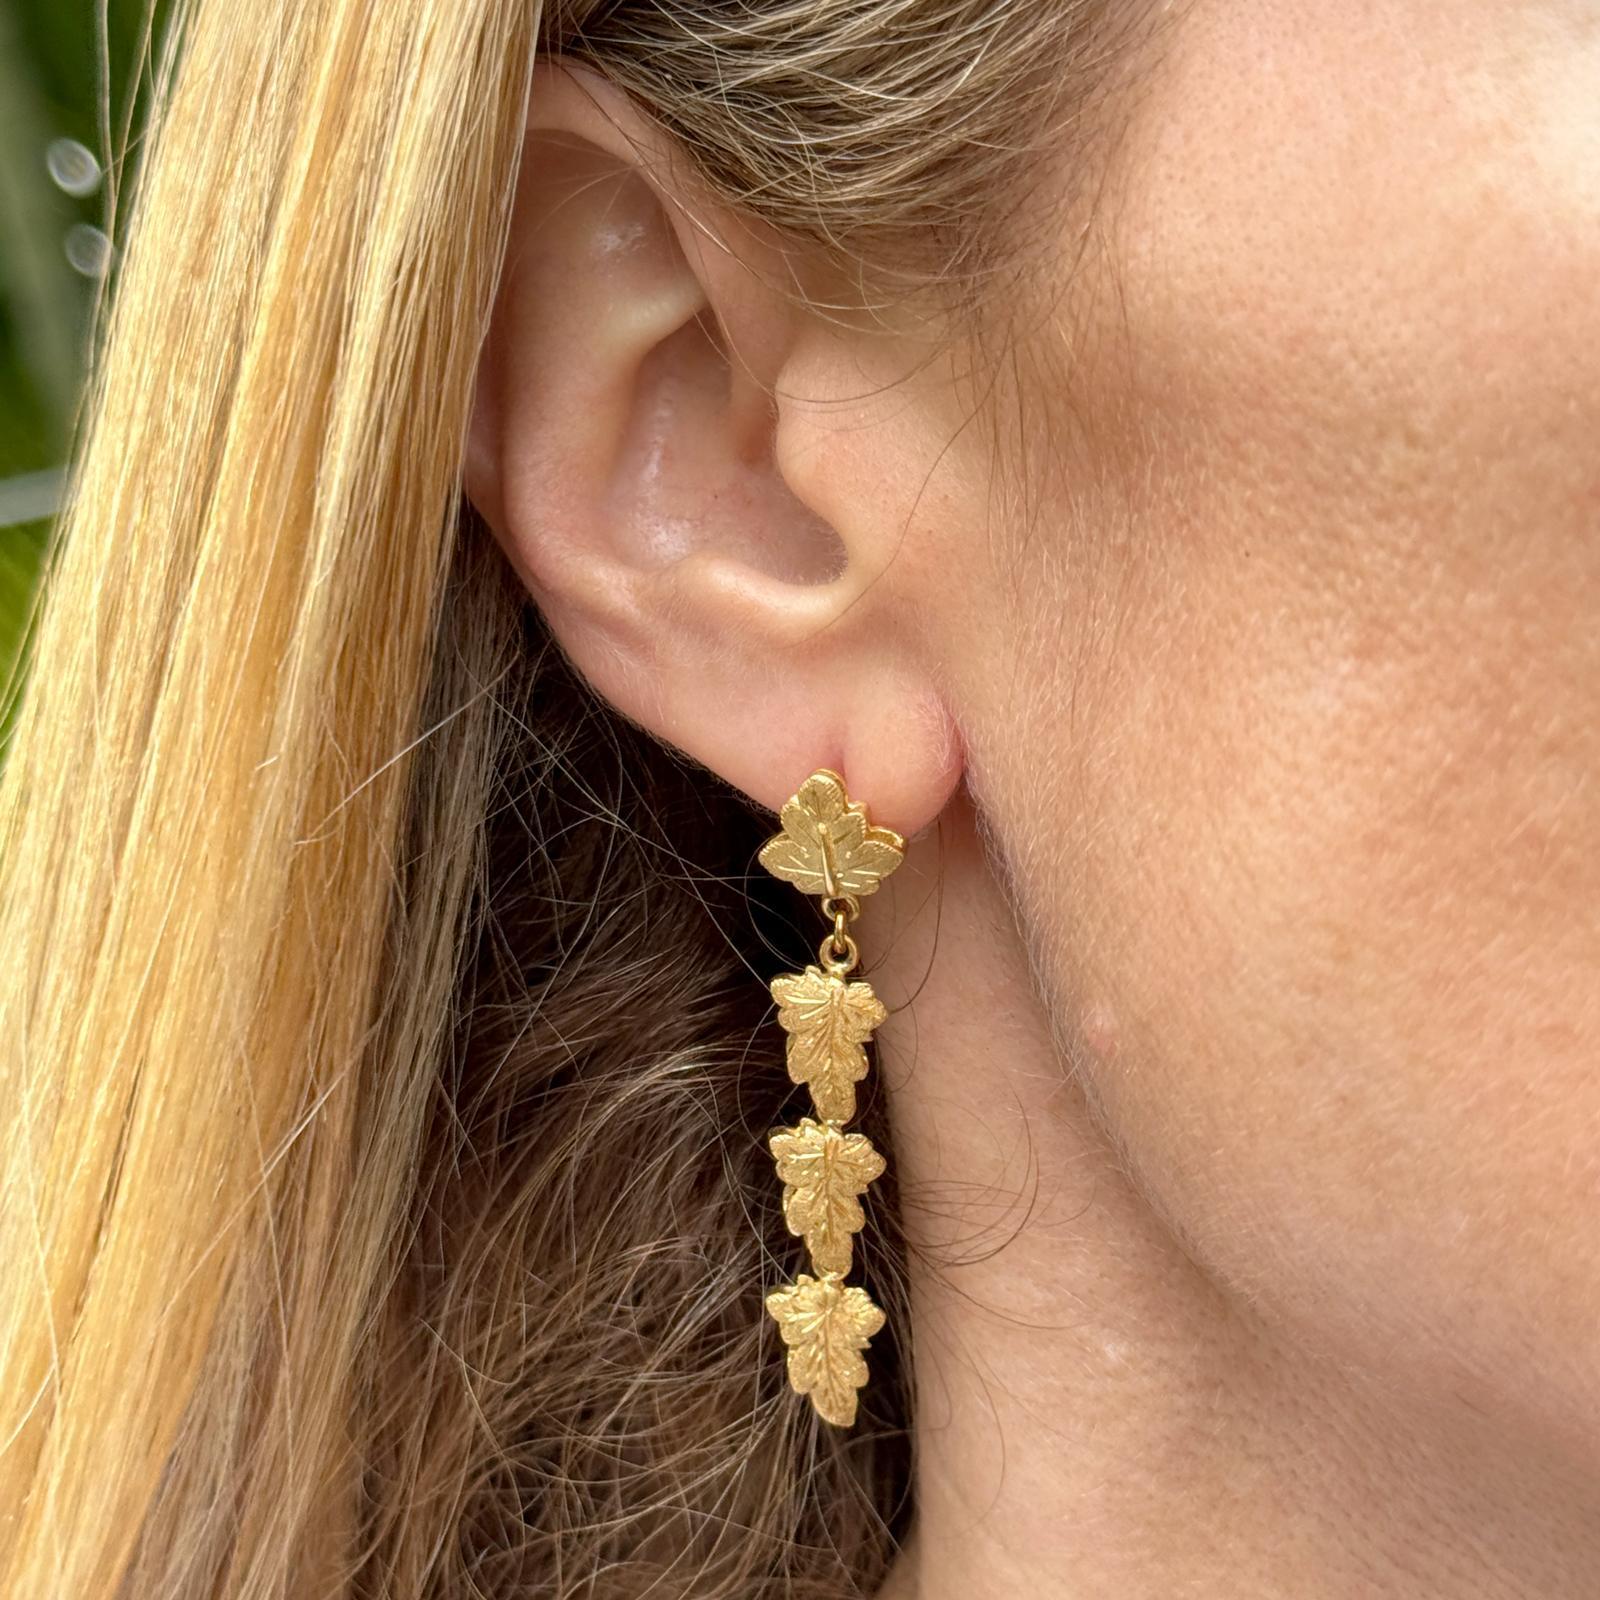 Italian designer leaf motif dangle earrings handcrafted in satin finish 18 karat yellow gold. The earrings measure 1.90 inches in length. Weight: 8.7 grams. Signed Fabbrini. Weight: 8.7 grams.